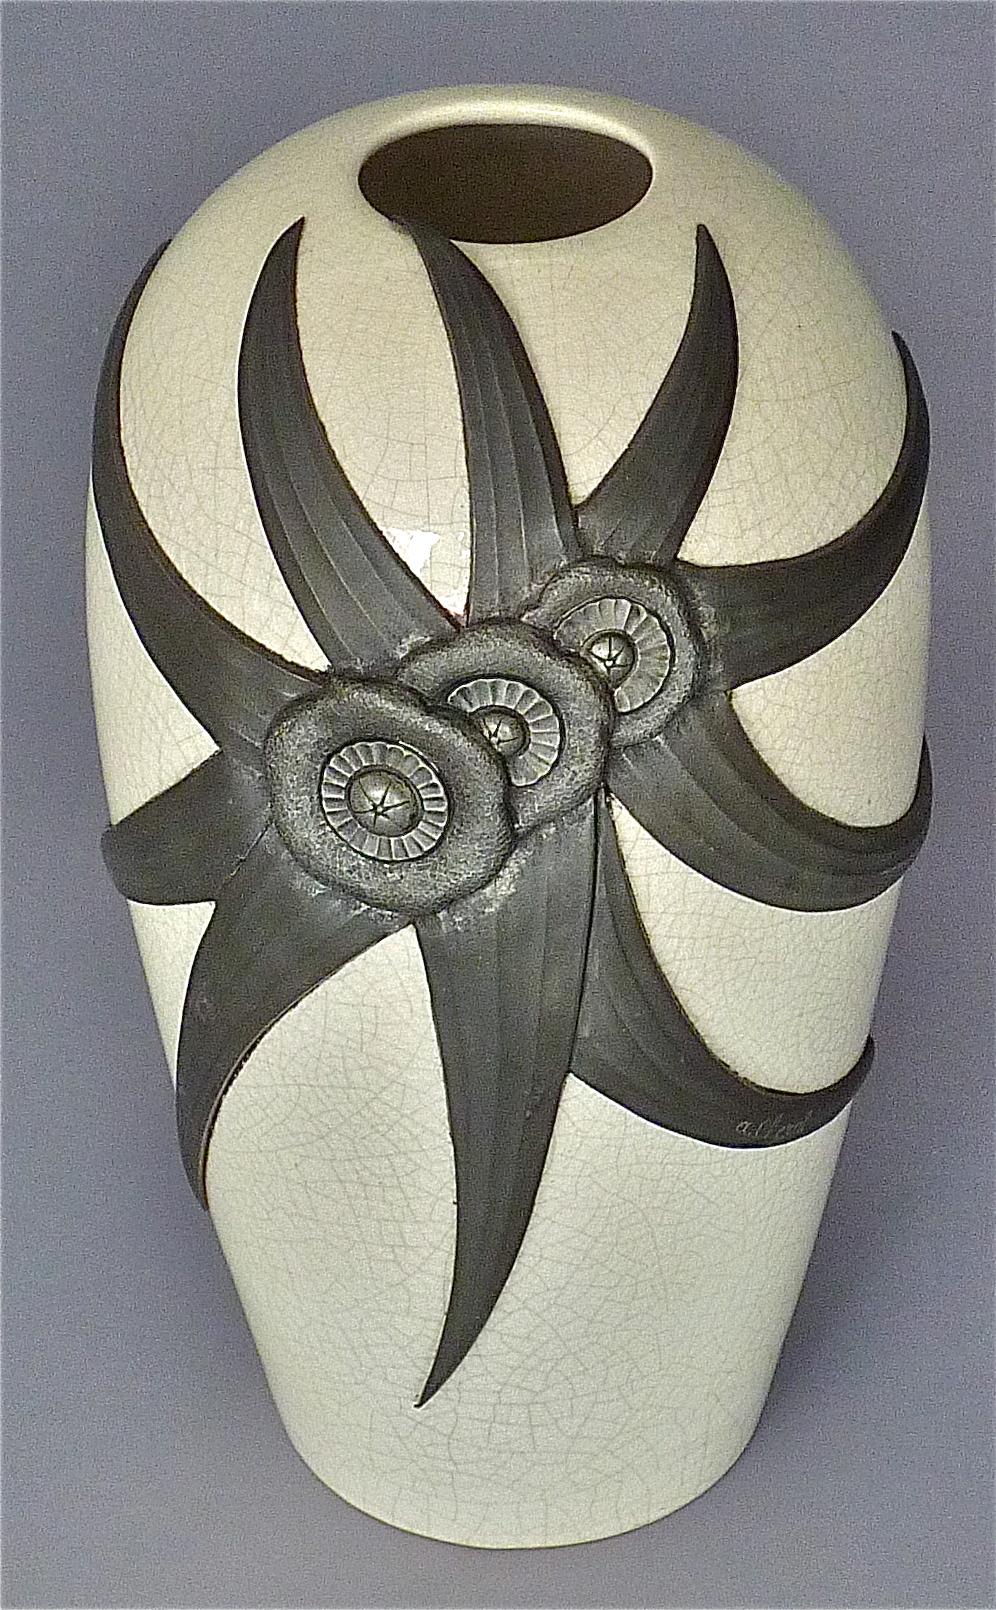 Exceptional large antique French Art Nouveau / Art Deco ceramic vase probably designed by Roger Guerin in cooperation with Albert Chezal, France around 1910-1930. The crackled glaze ceramic vase in ivory or off-white color has a beautiful large